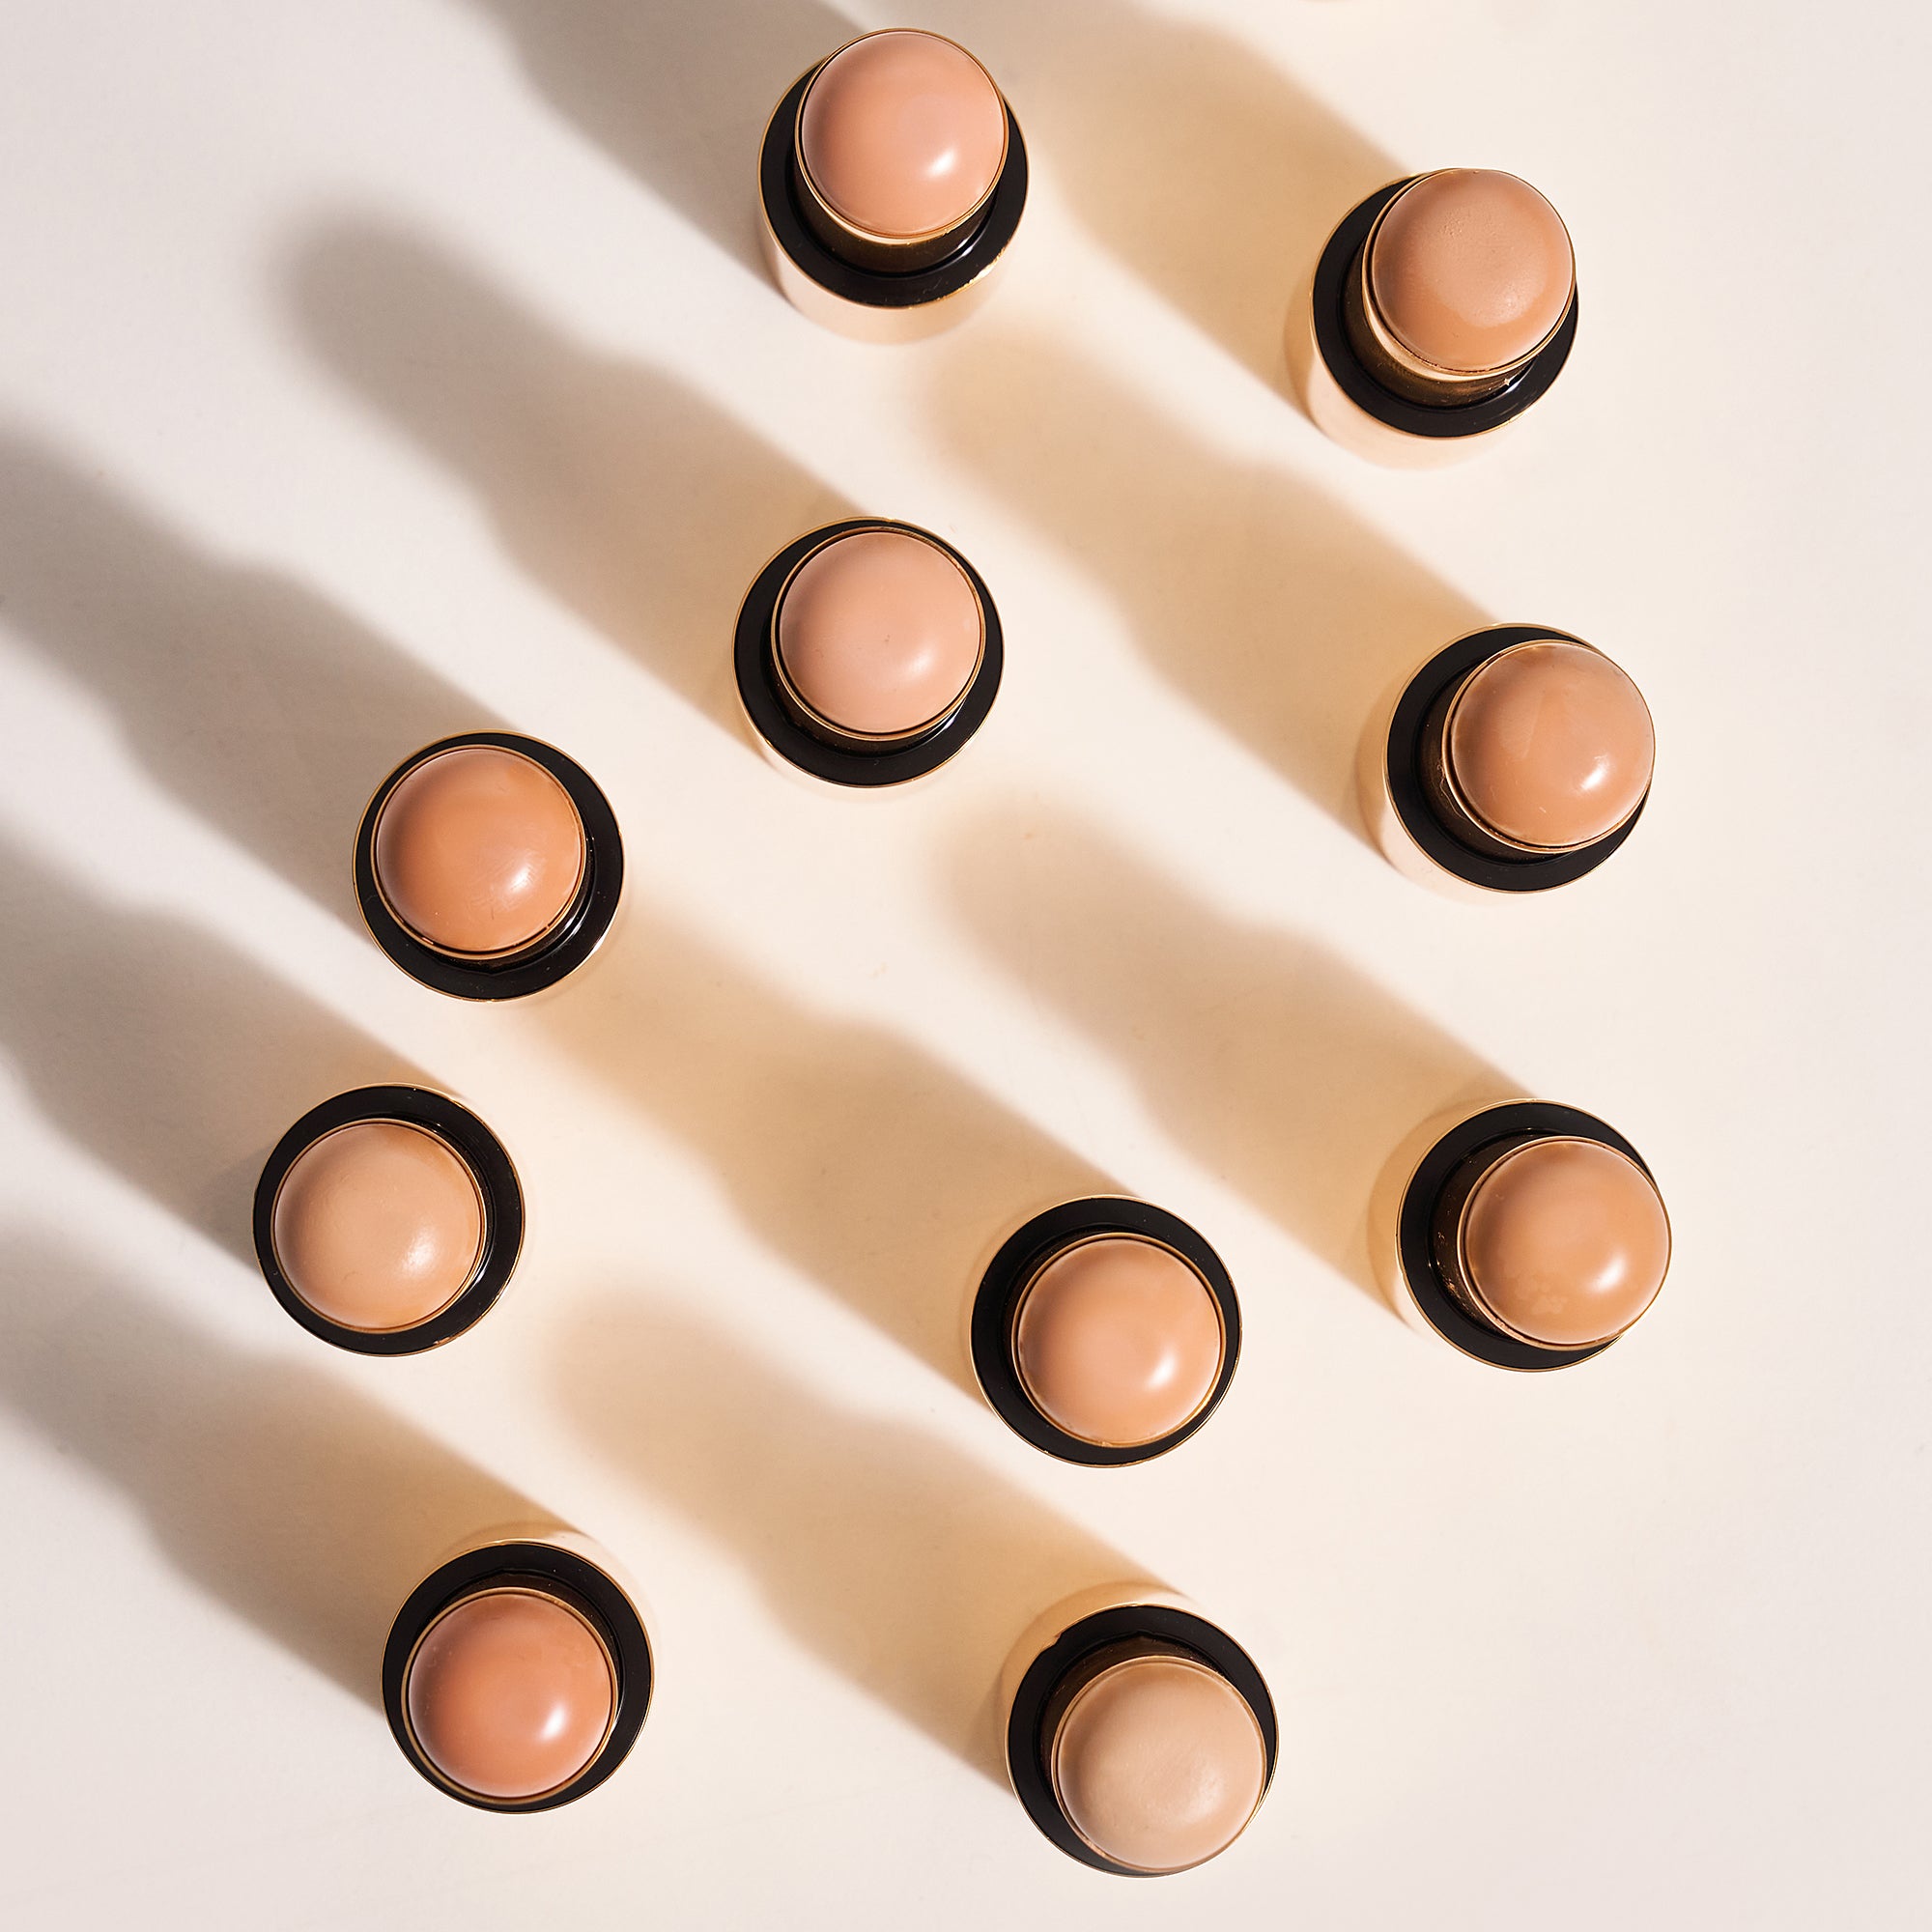 Rele-Wand™ 3-N-1 Foundation | Delight